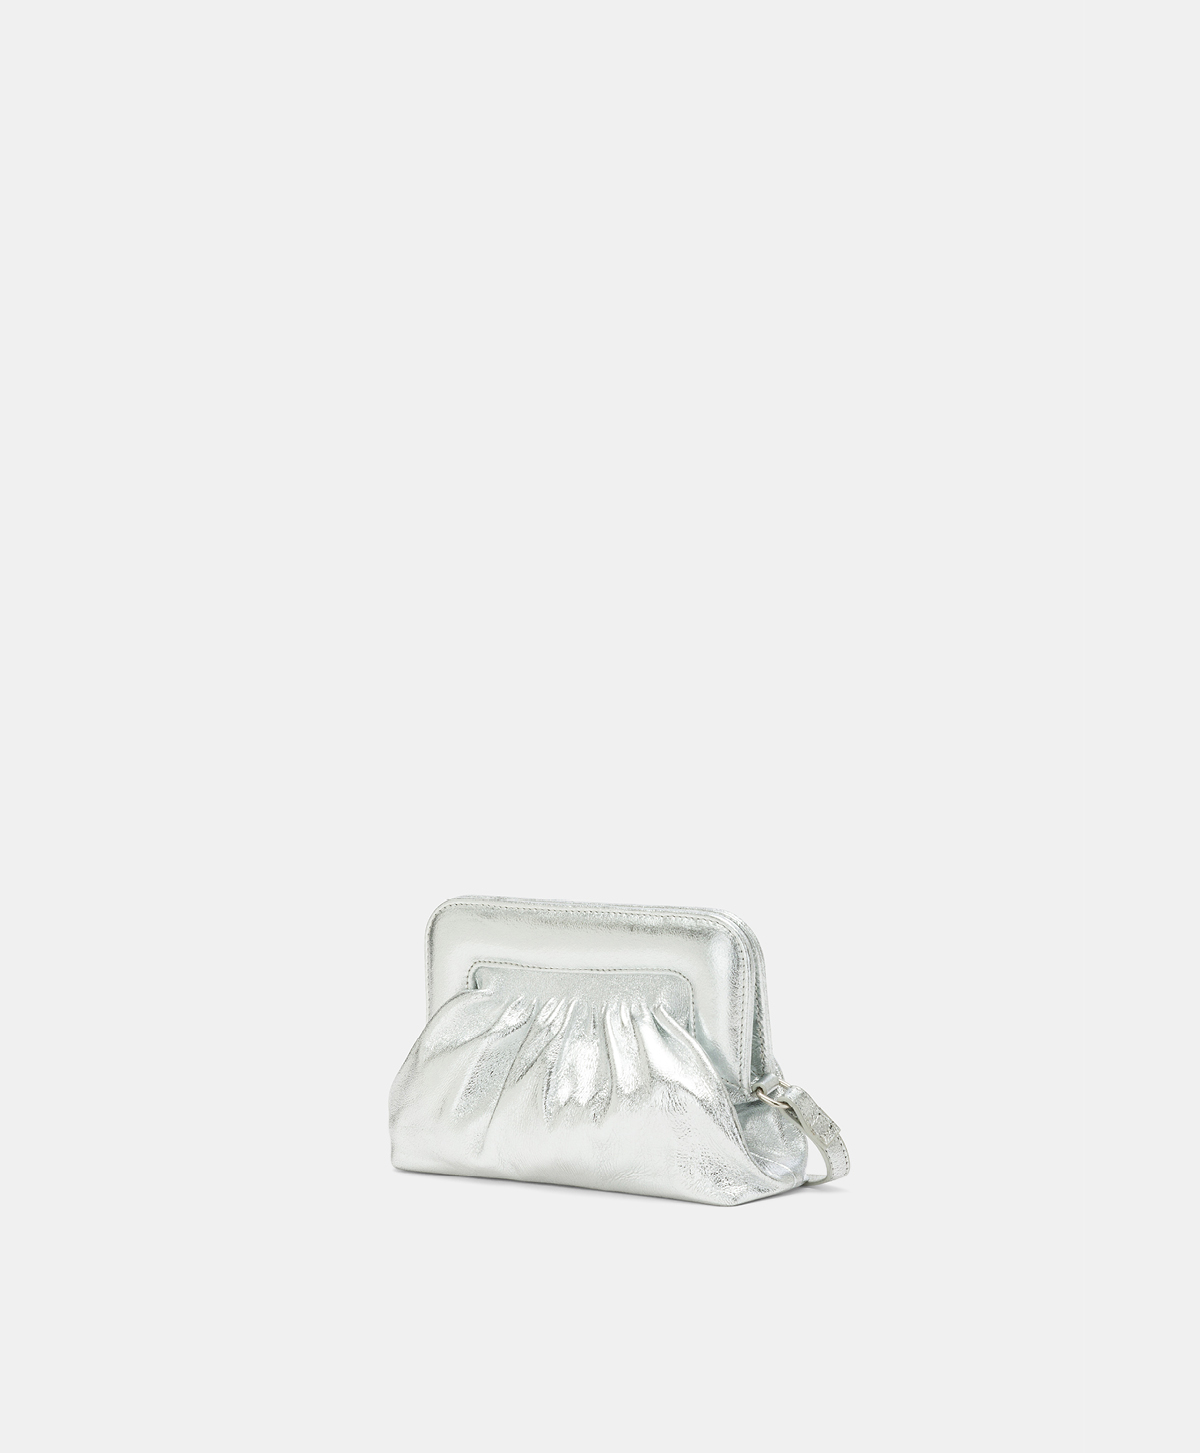 GREELEY LAMINATED LEATHER BAG - SILVER - Momonì